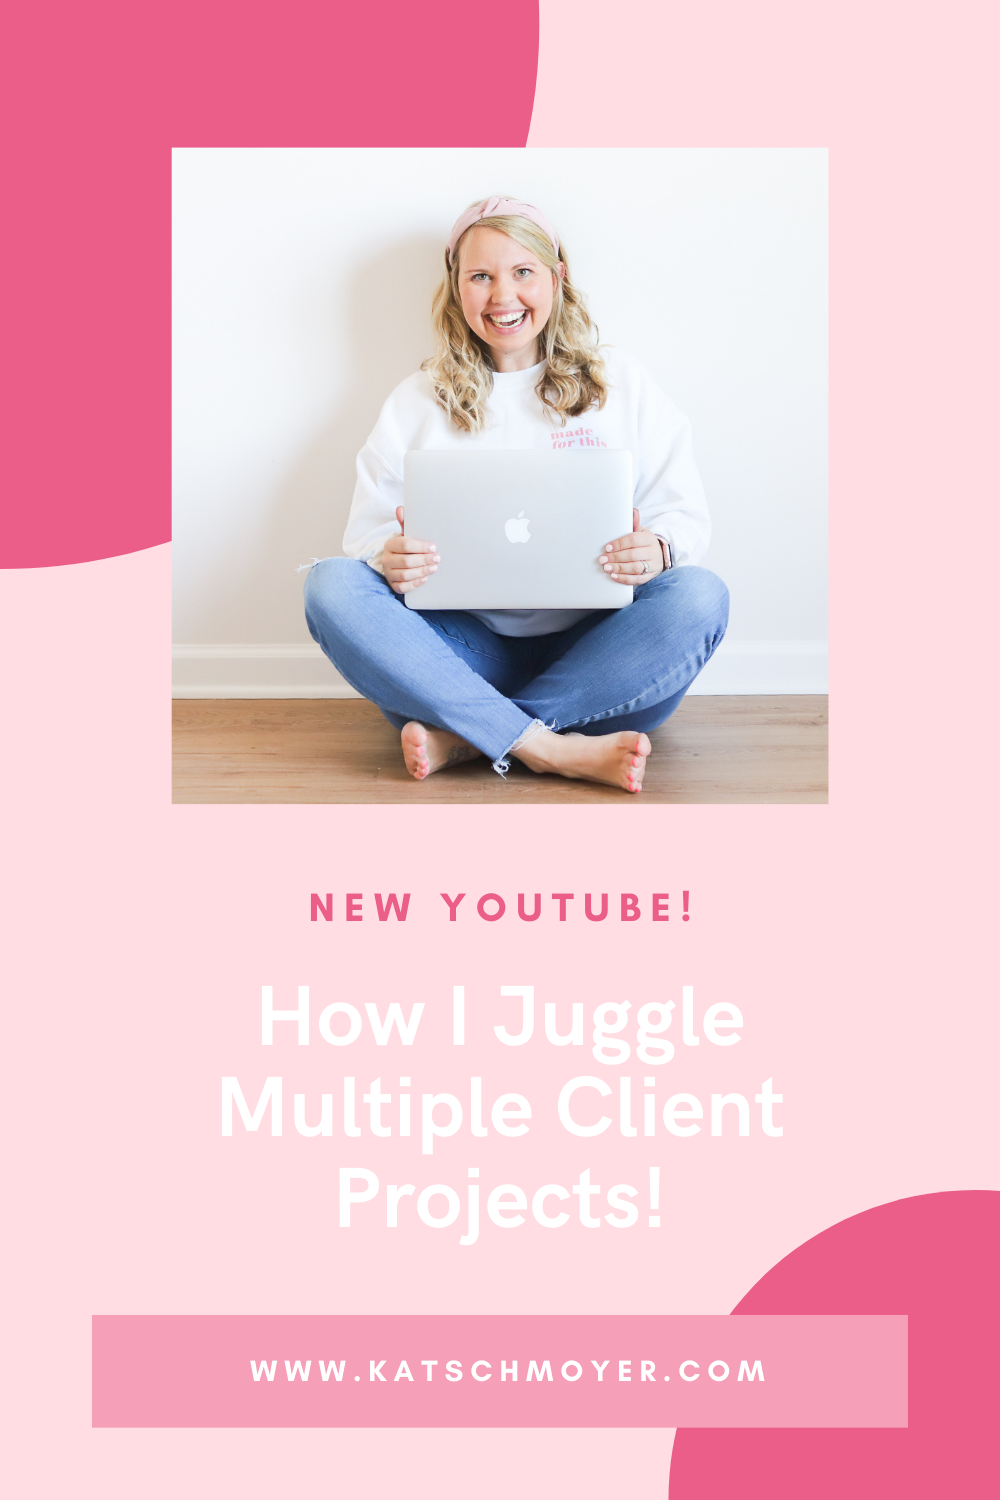 How I Juggle Multiple Client Projects